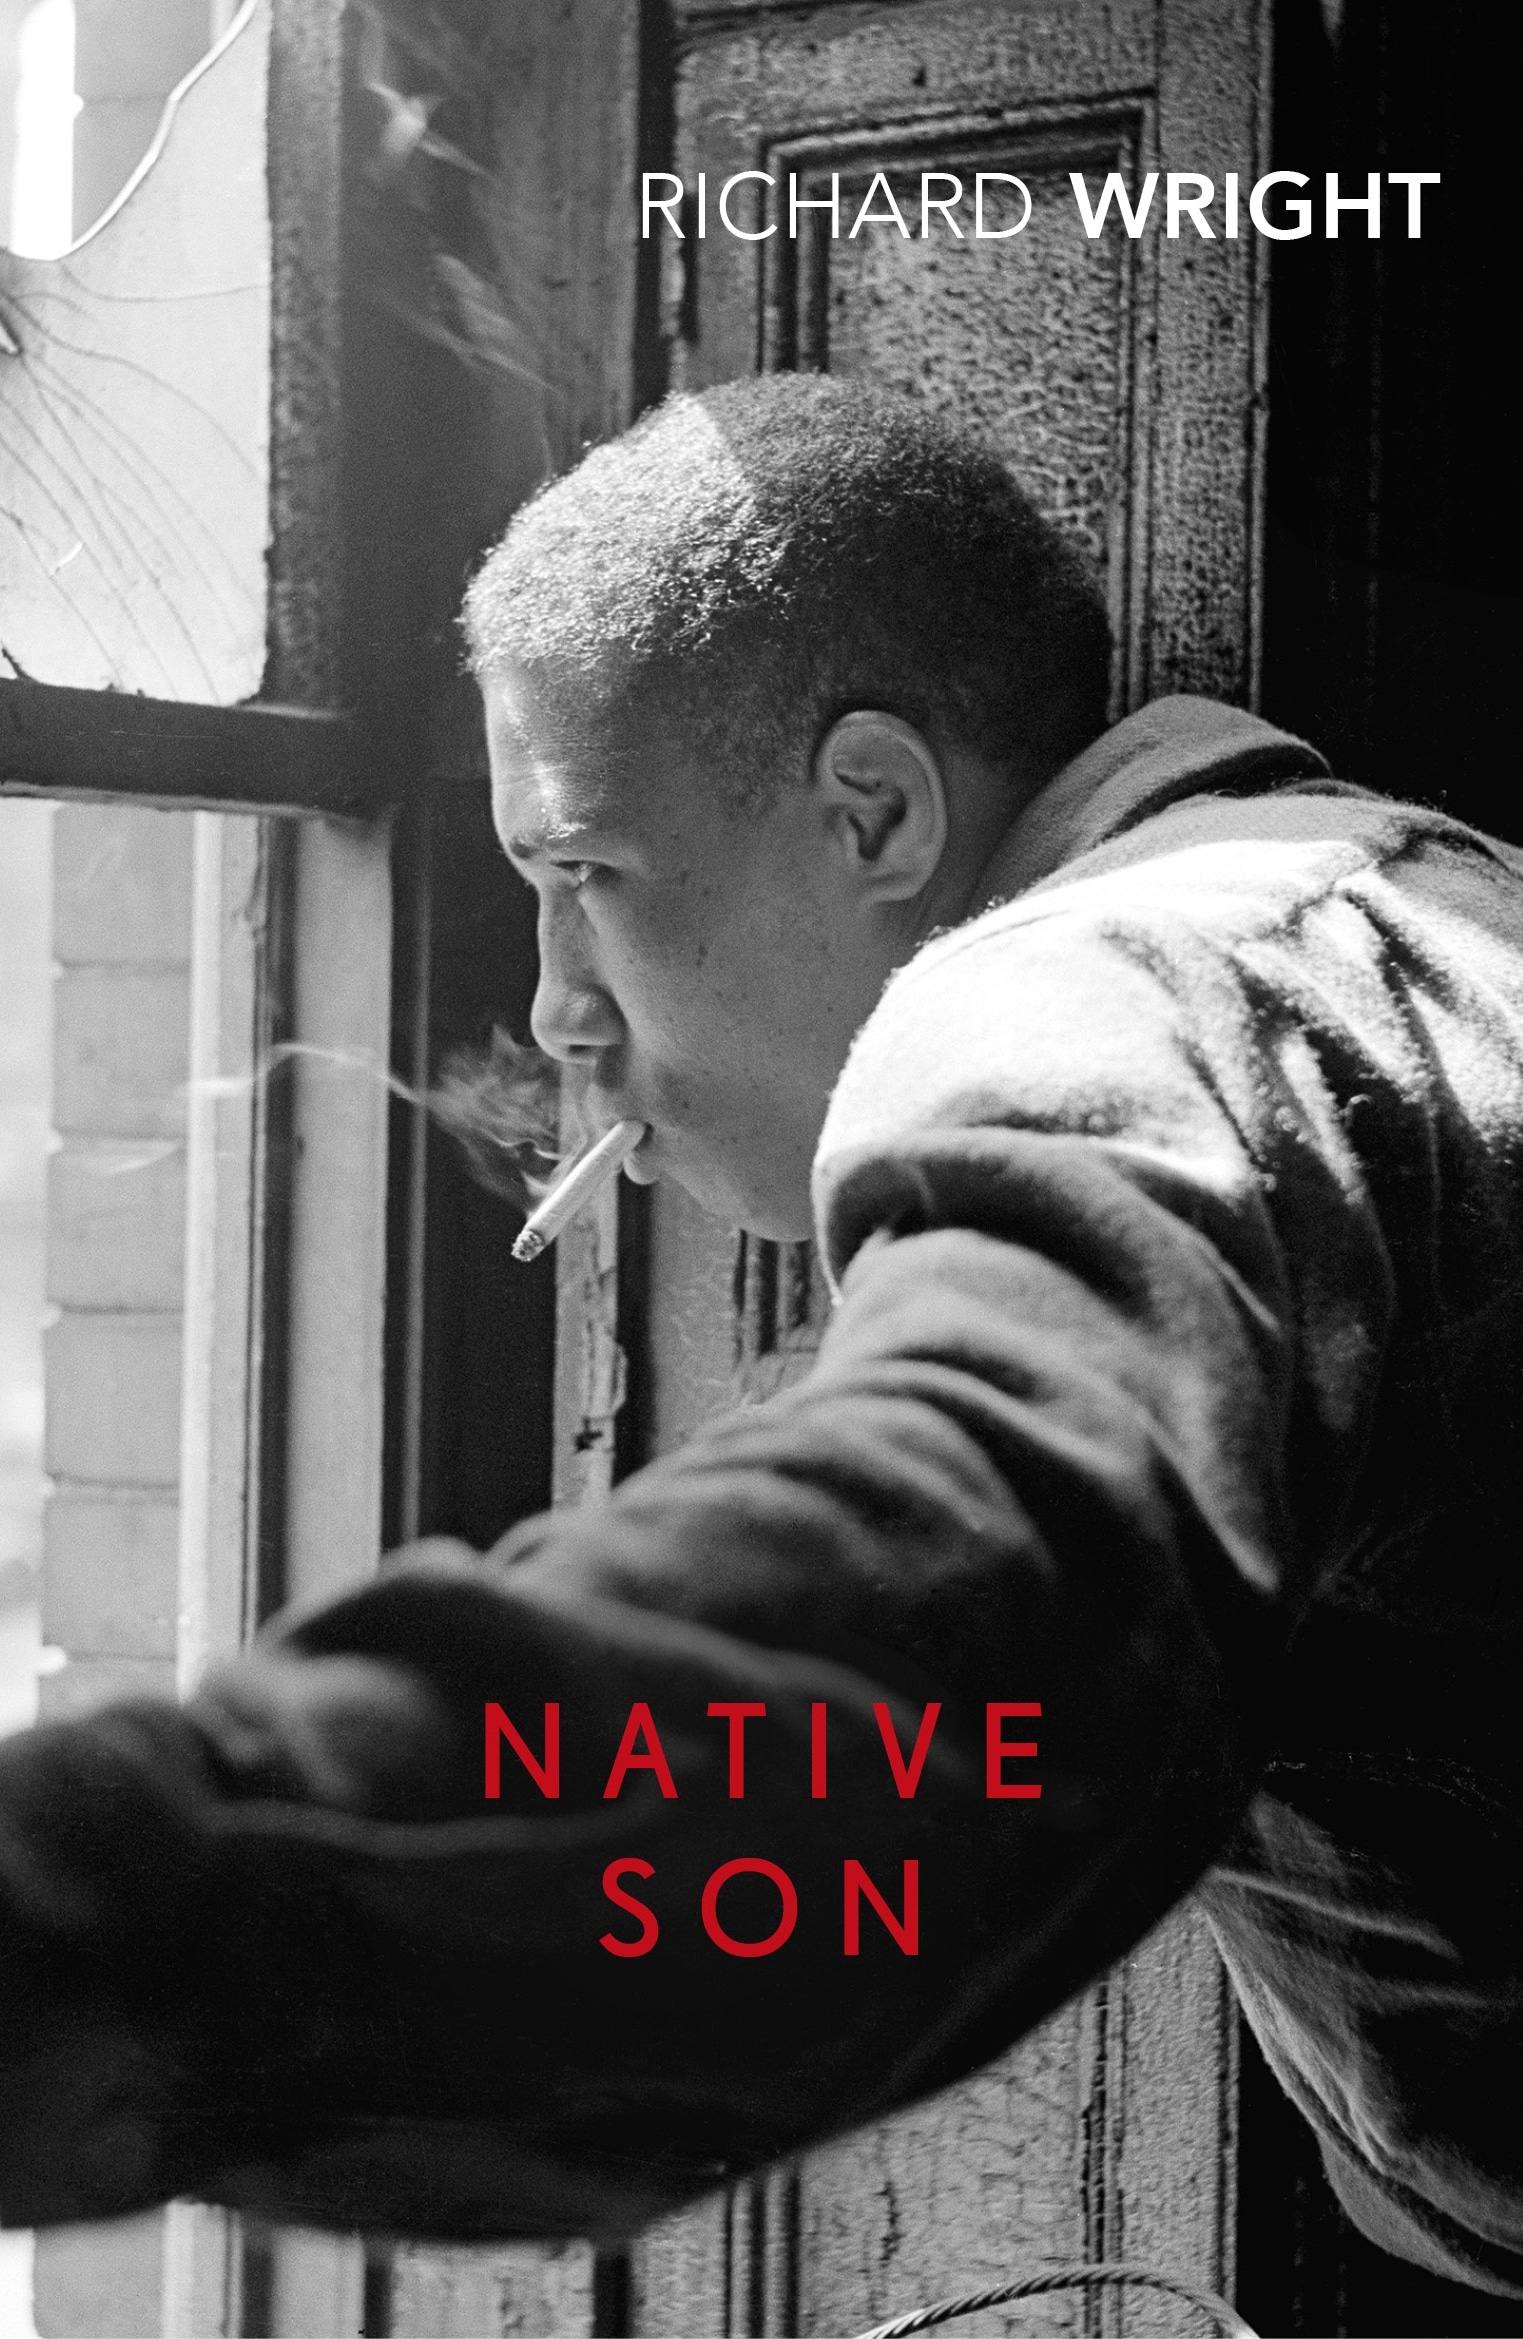 Book “Native Son” by Richard Wright — October 1, 2020